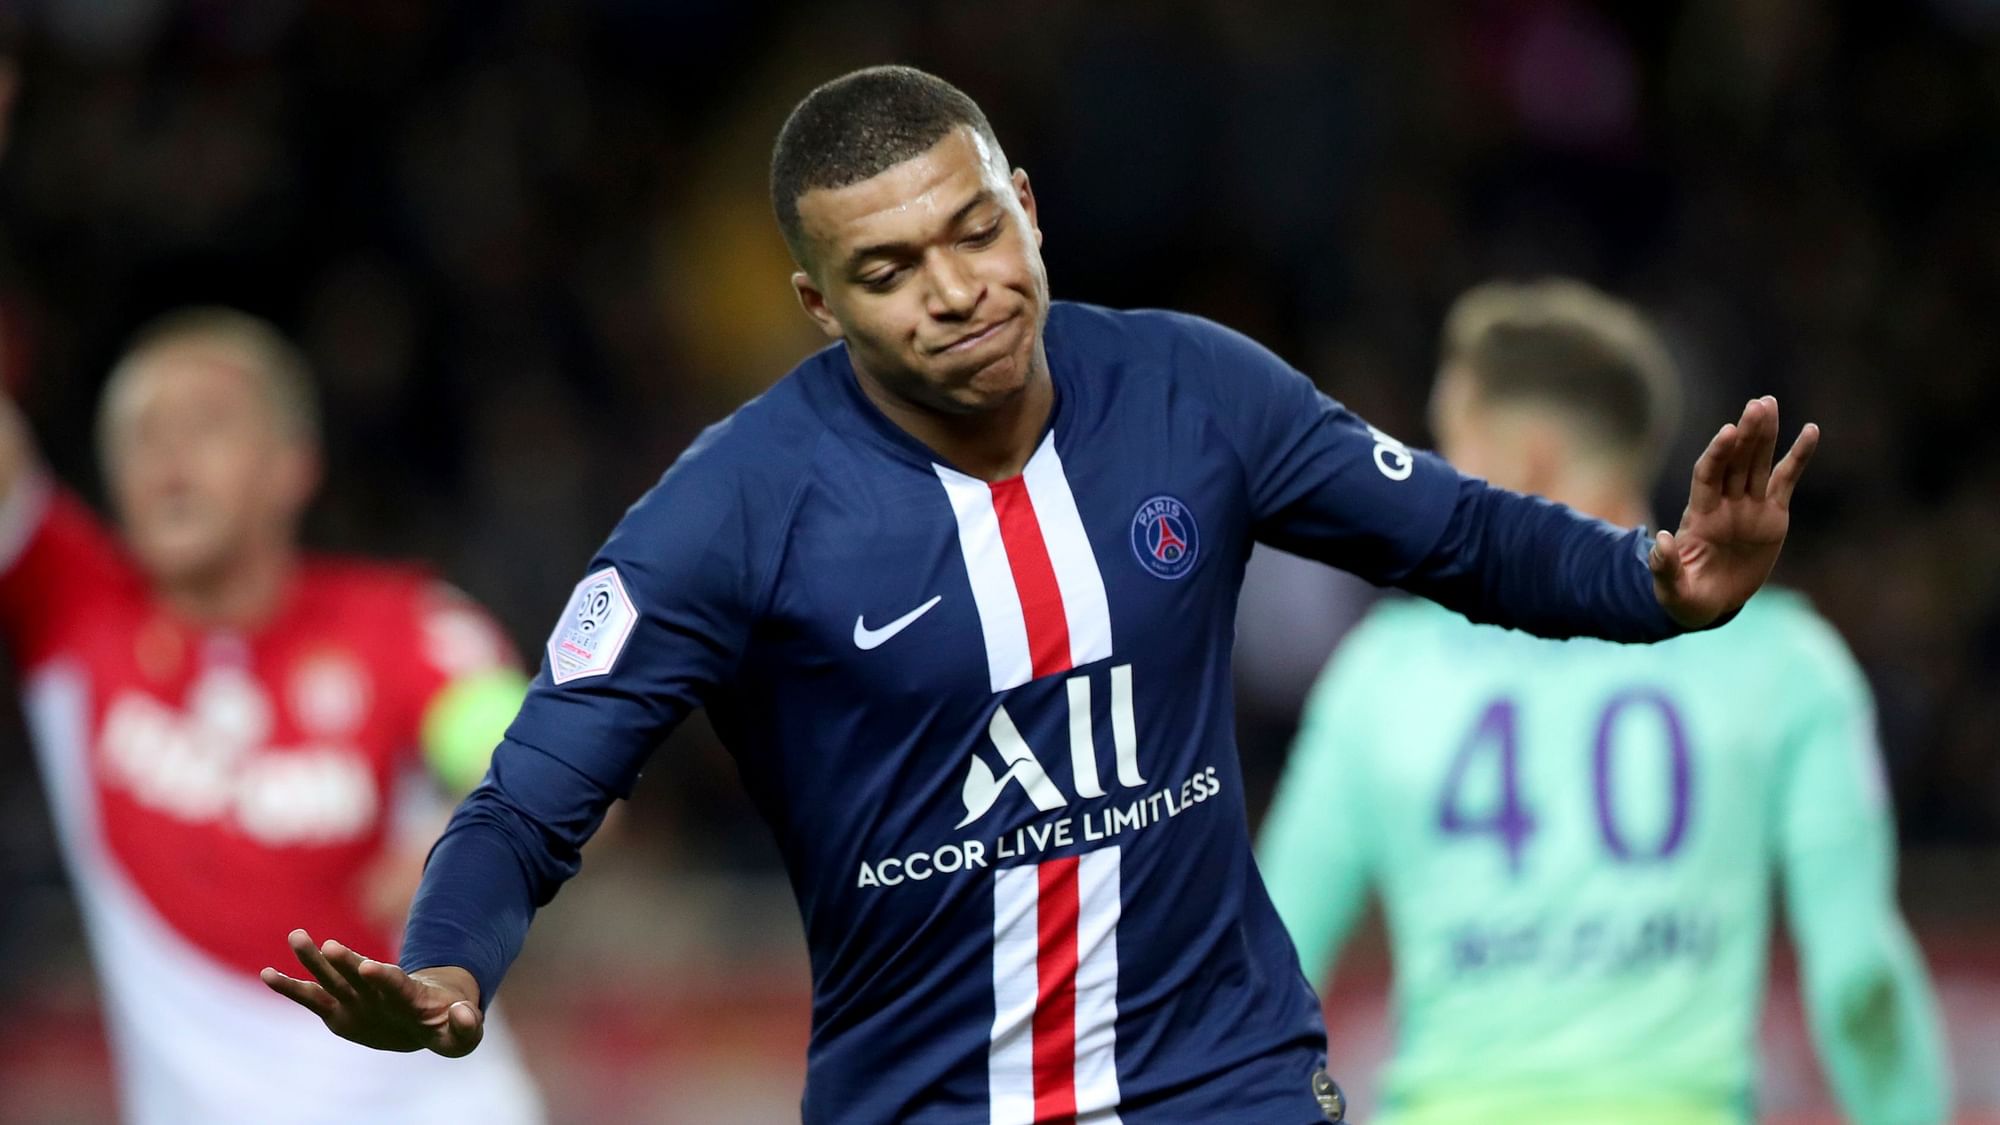 PSG’s Kylian Mbappe celebrates after scoring his side’s opening goal during the French League One soccer match between Monaco and Paris Saint-Germain.